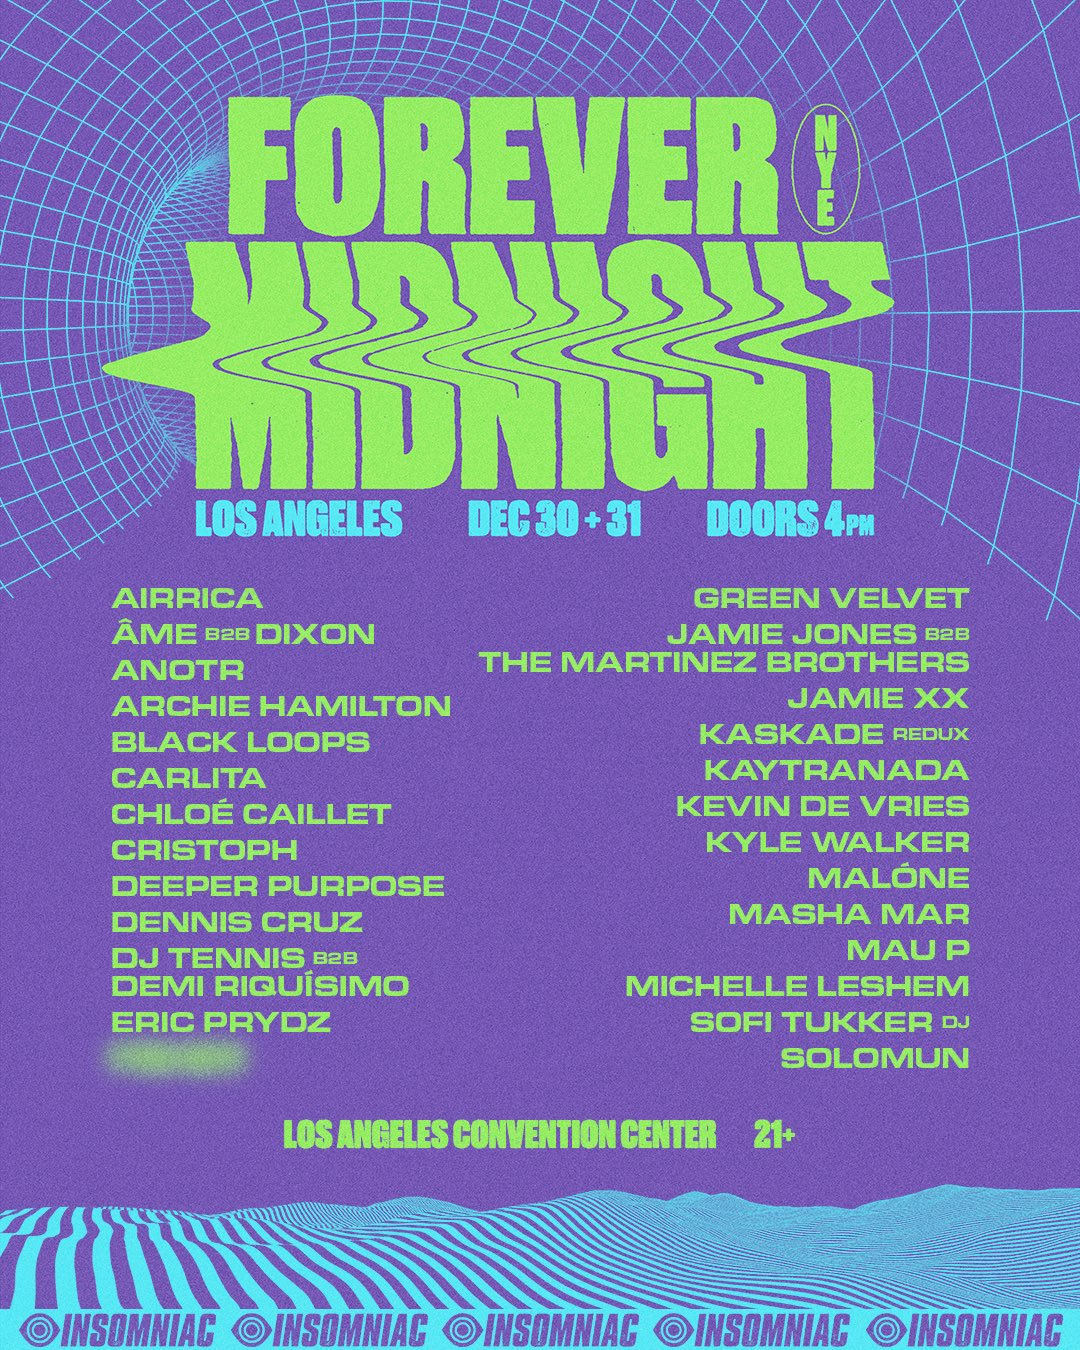 Forever Midnight Los Angeles NYE Lineup Tickets